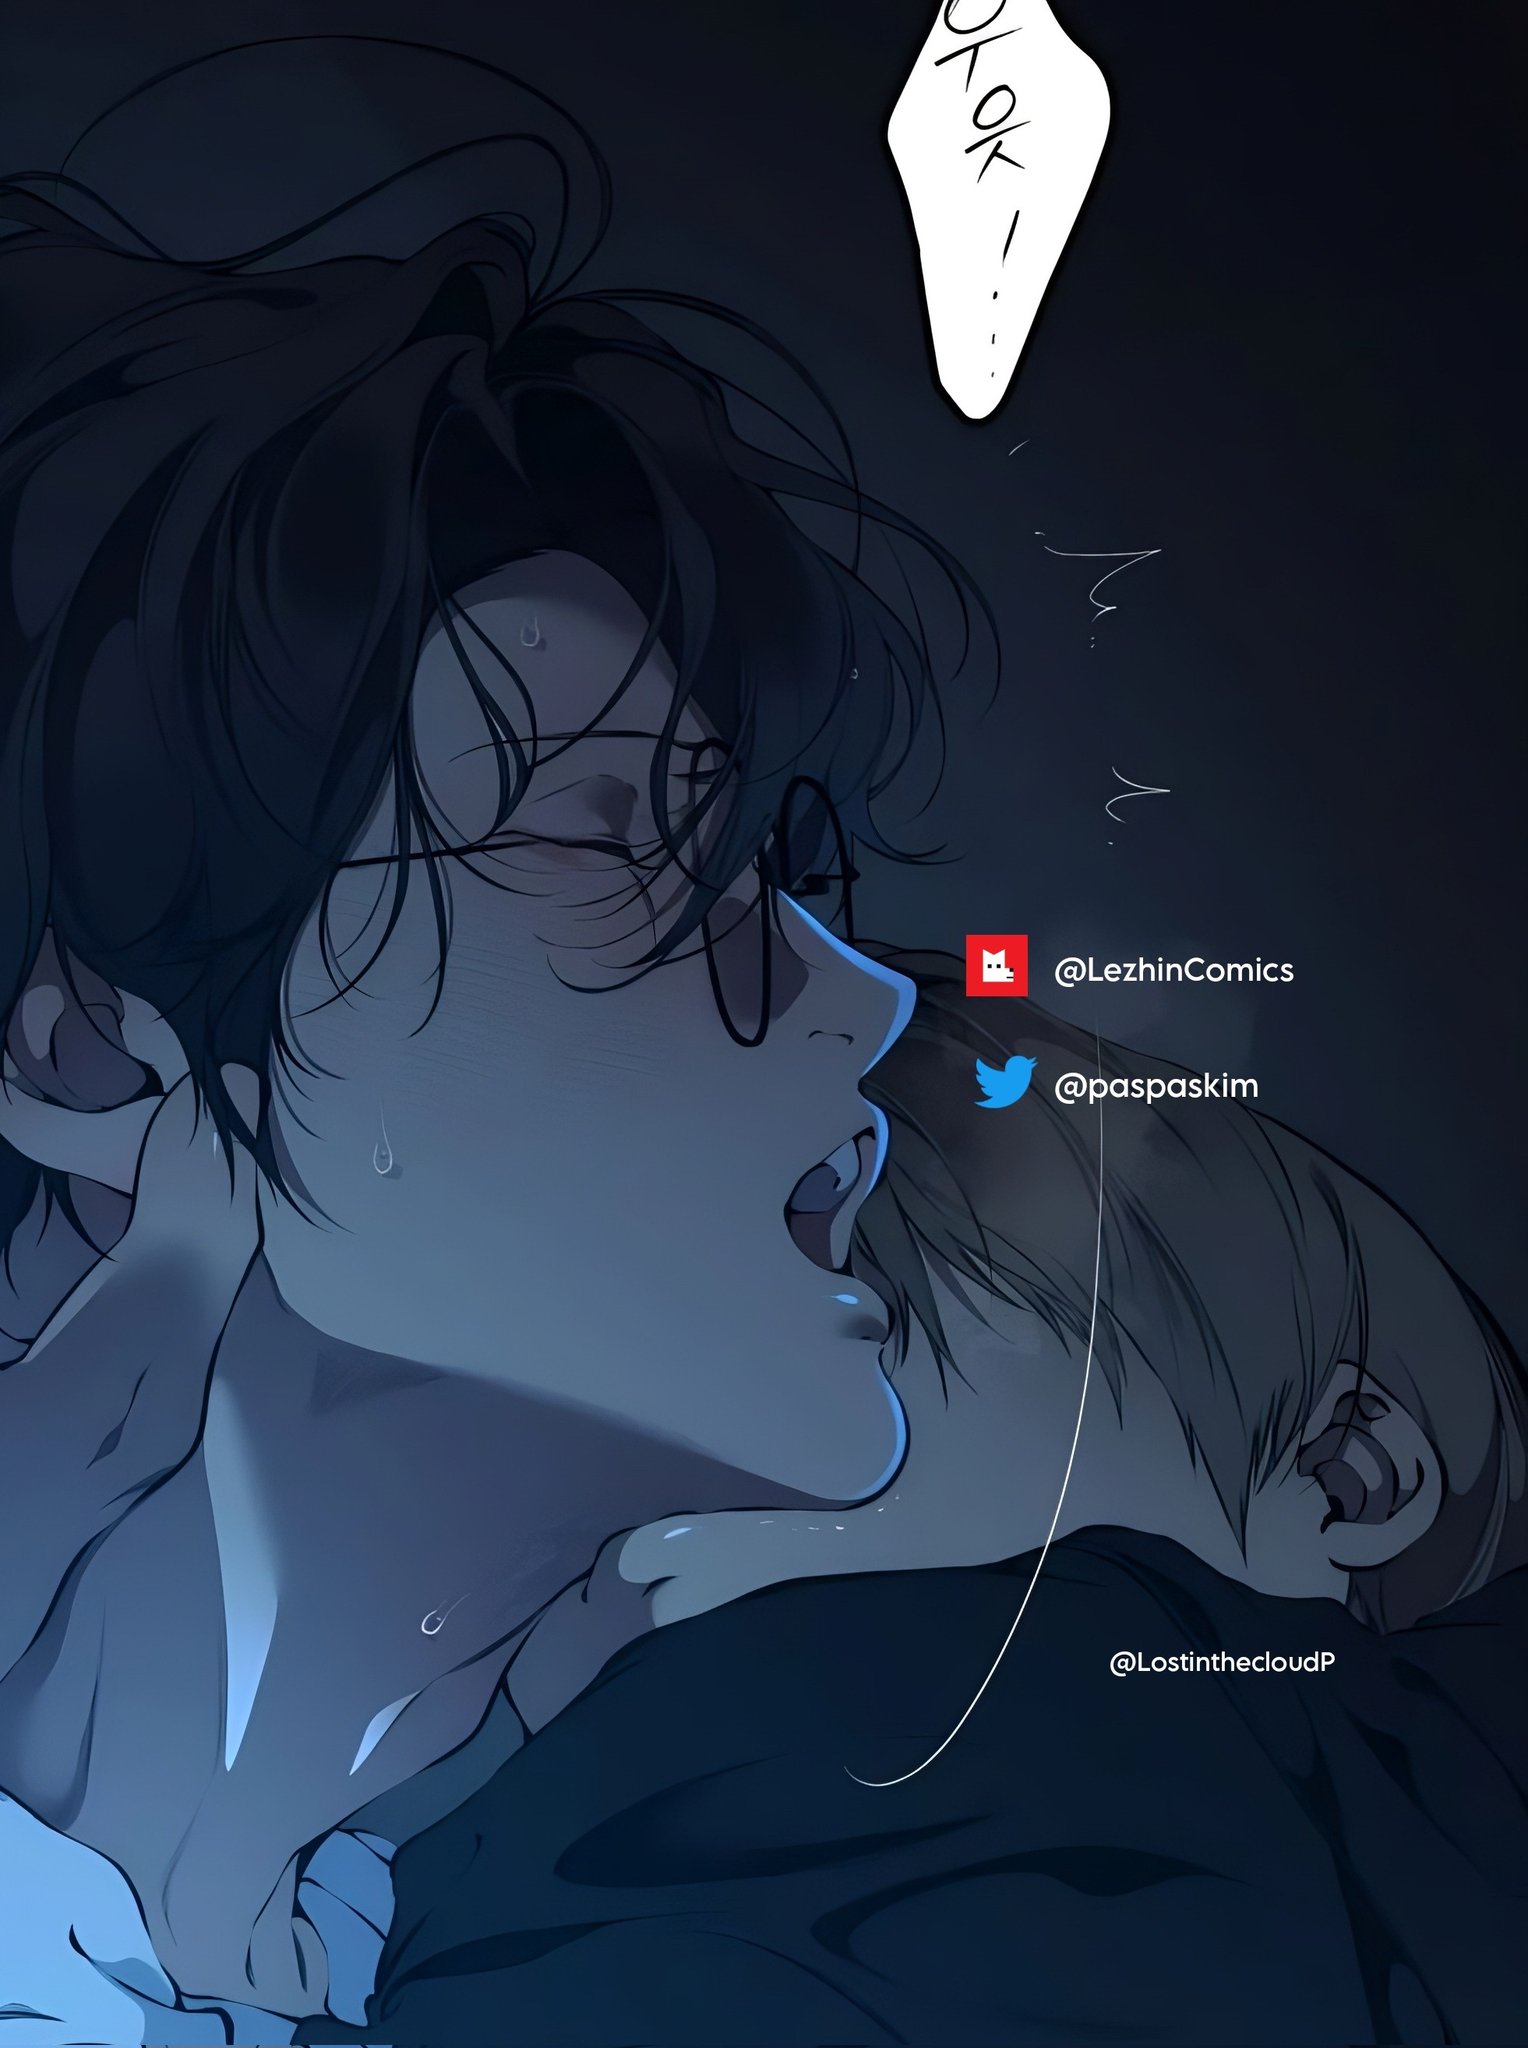 Lost In The Cloud Bl 82 Lost In The Cloud on X: "#Lostinthecloud #Skyrus #클라우드 “Because it's you…”  EP82 shows the reader a change in both our protagonists: Skylar and Cirrus.  In this episode we can see a